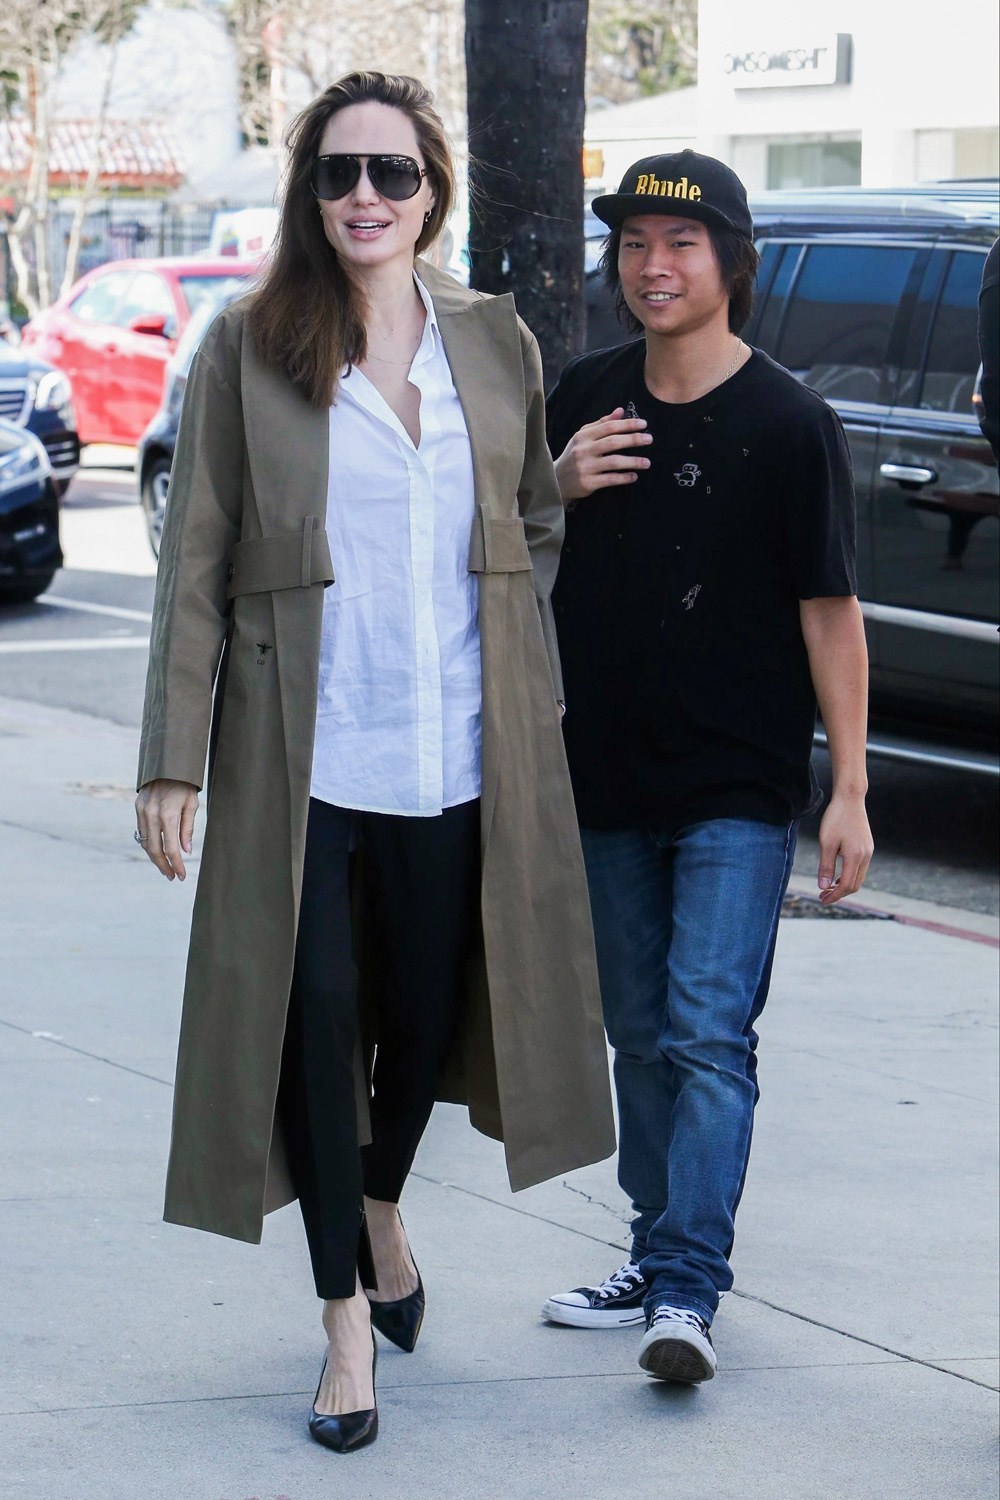 angelina jolie all smiles while shopping with pax after brad pitt jennifer aniston reunite at her birthday party 01